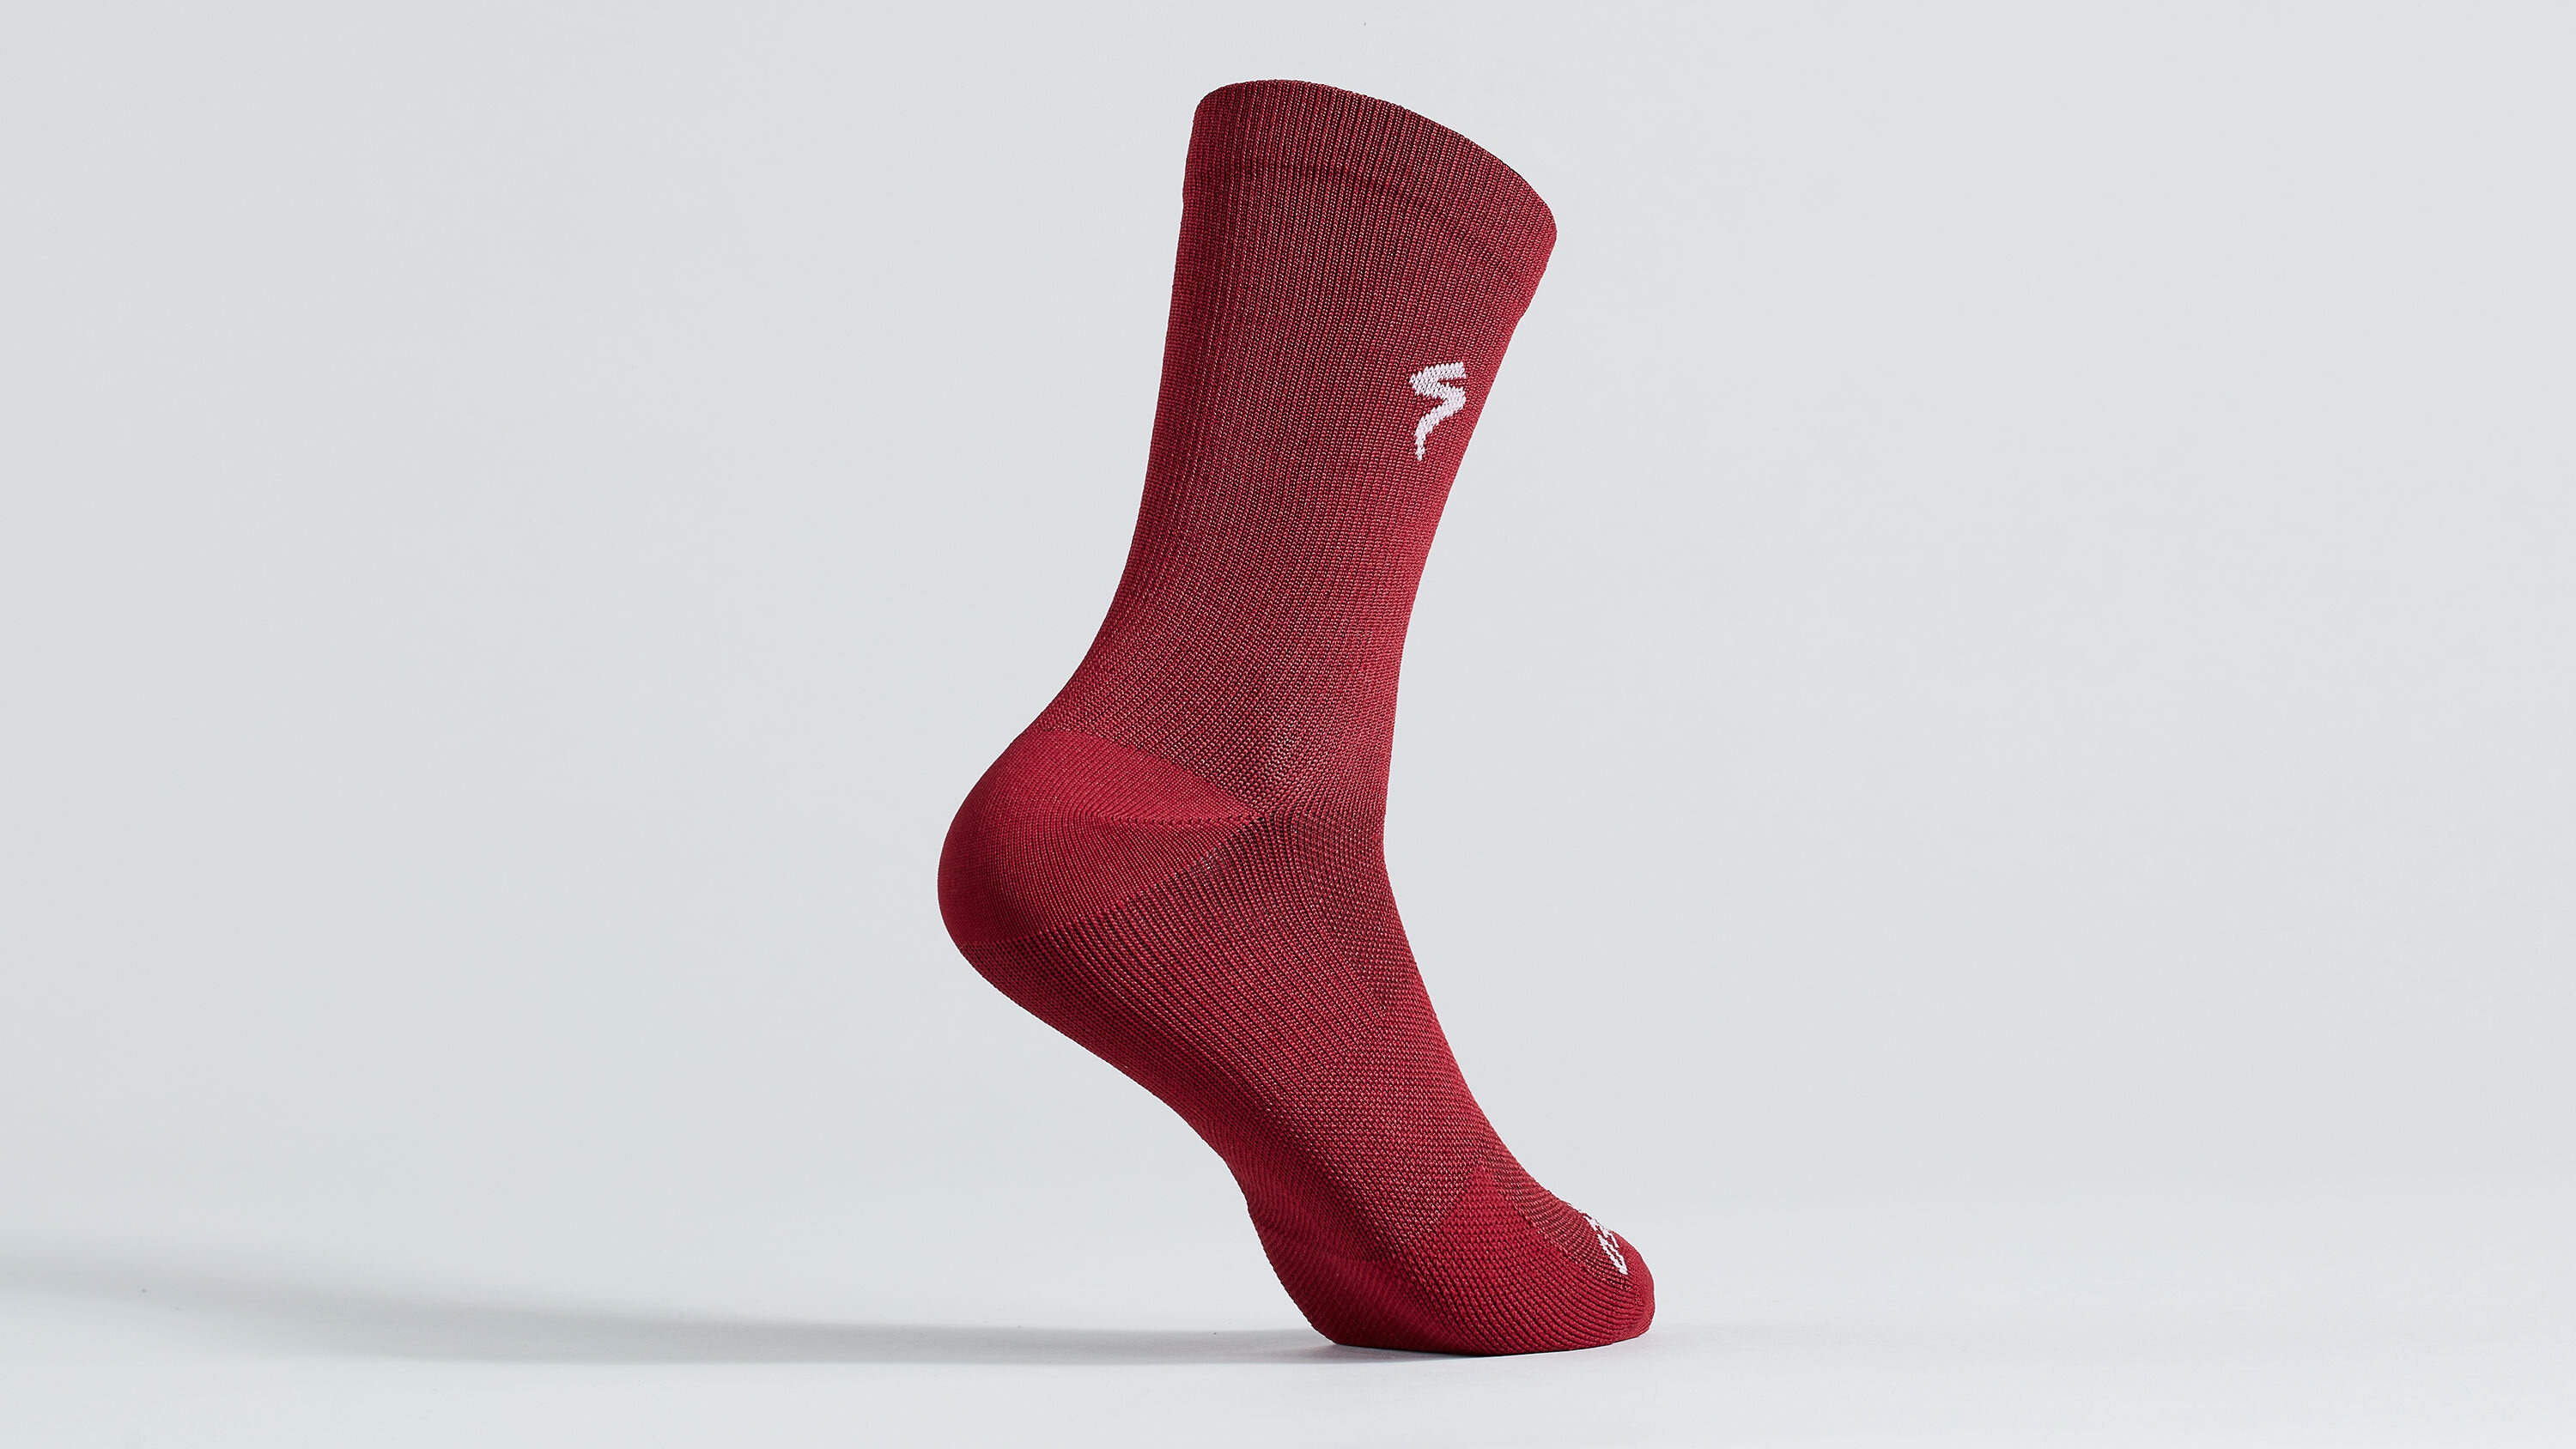 Specialized Socka, Soft Air Tall Sock, Speed of Light Infrared